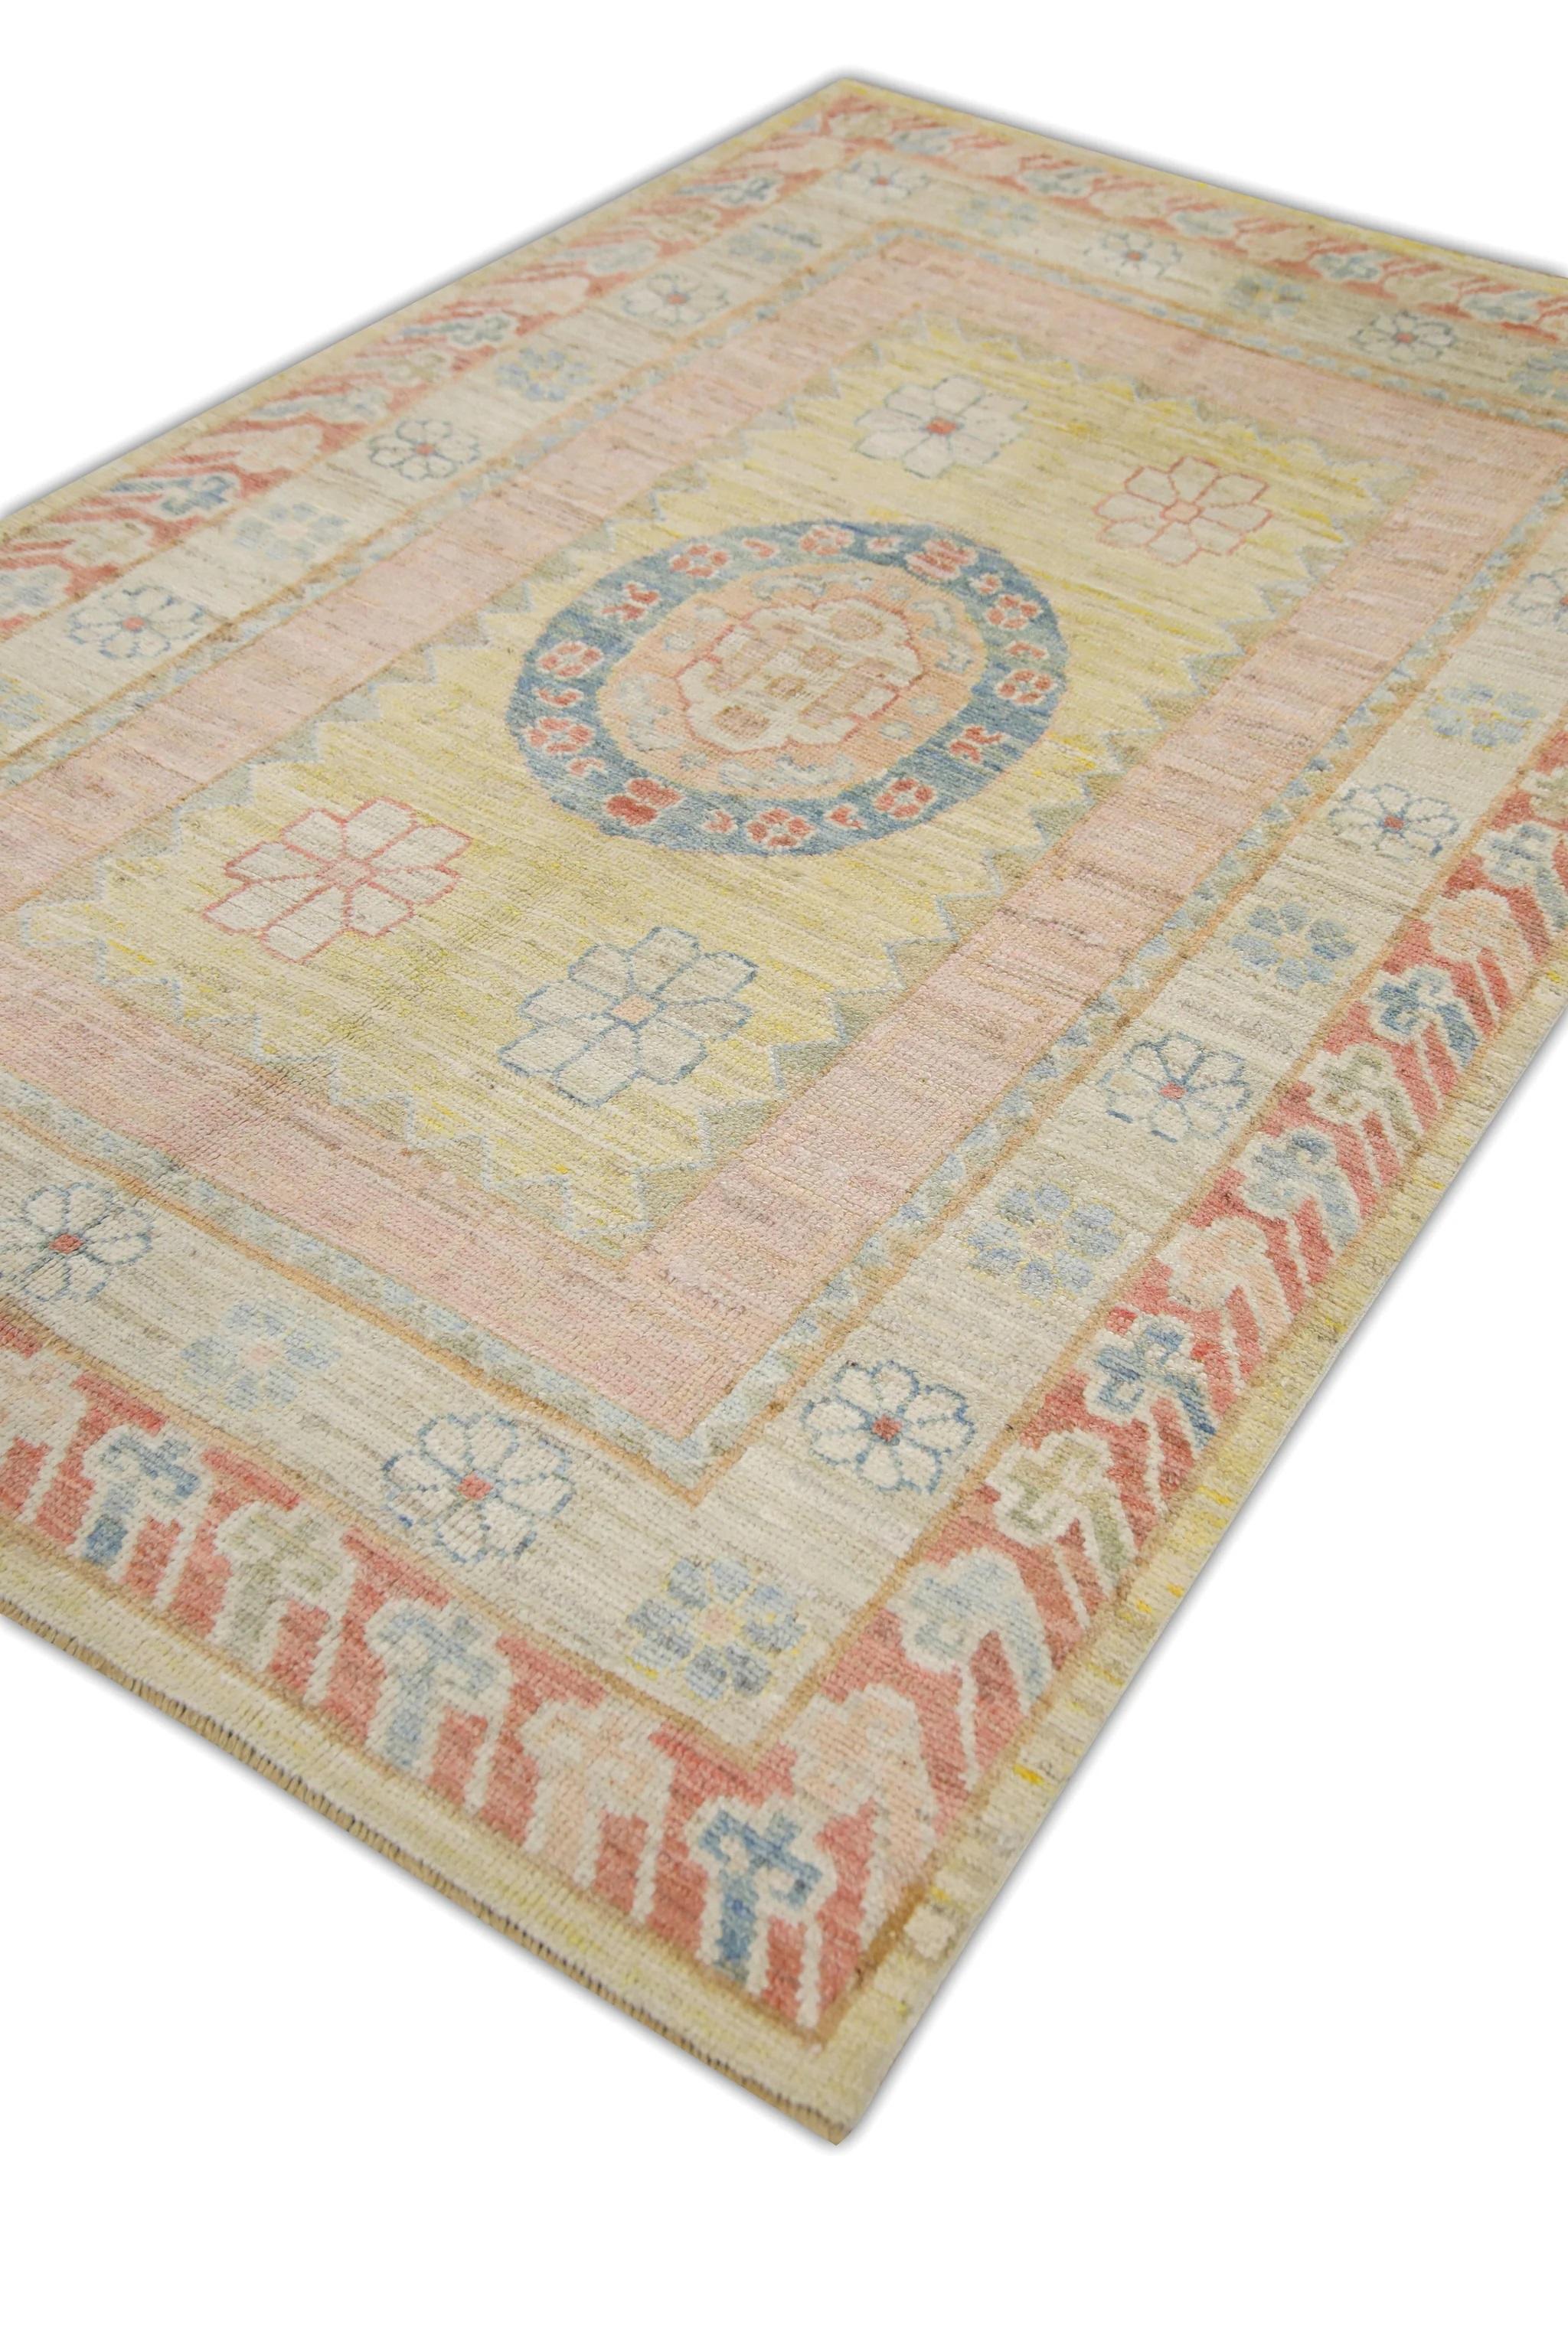 This modern Turkish Oushak rug made from reclaimed vintage wool is a stunning piece of art that has been handwoven using traditional techniques by skilled artisans. The rug features intricate patterns and a soft color palette that is achieved